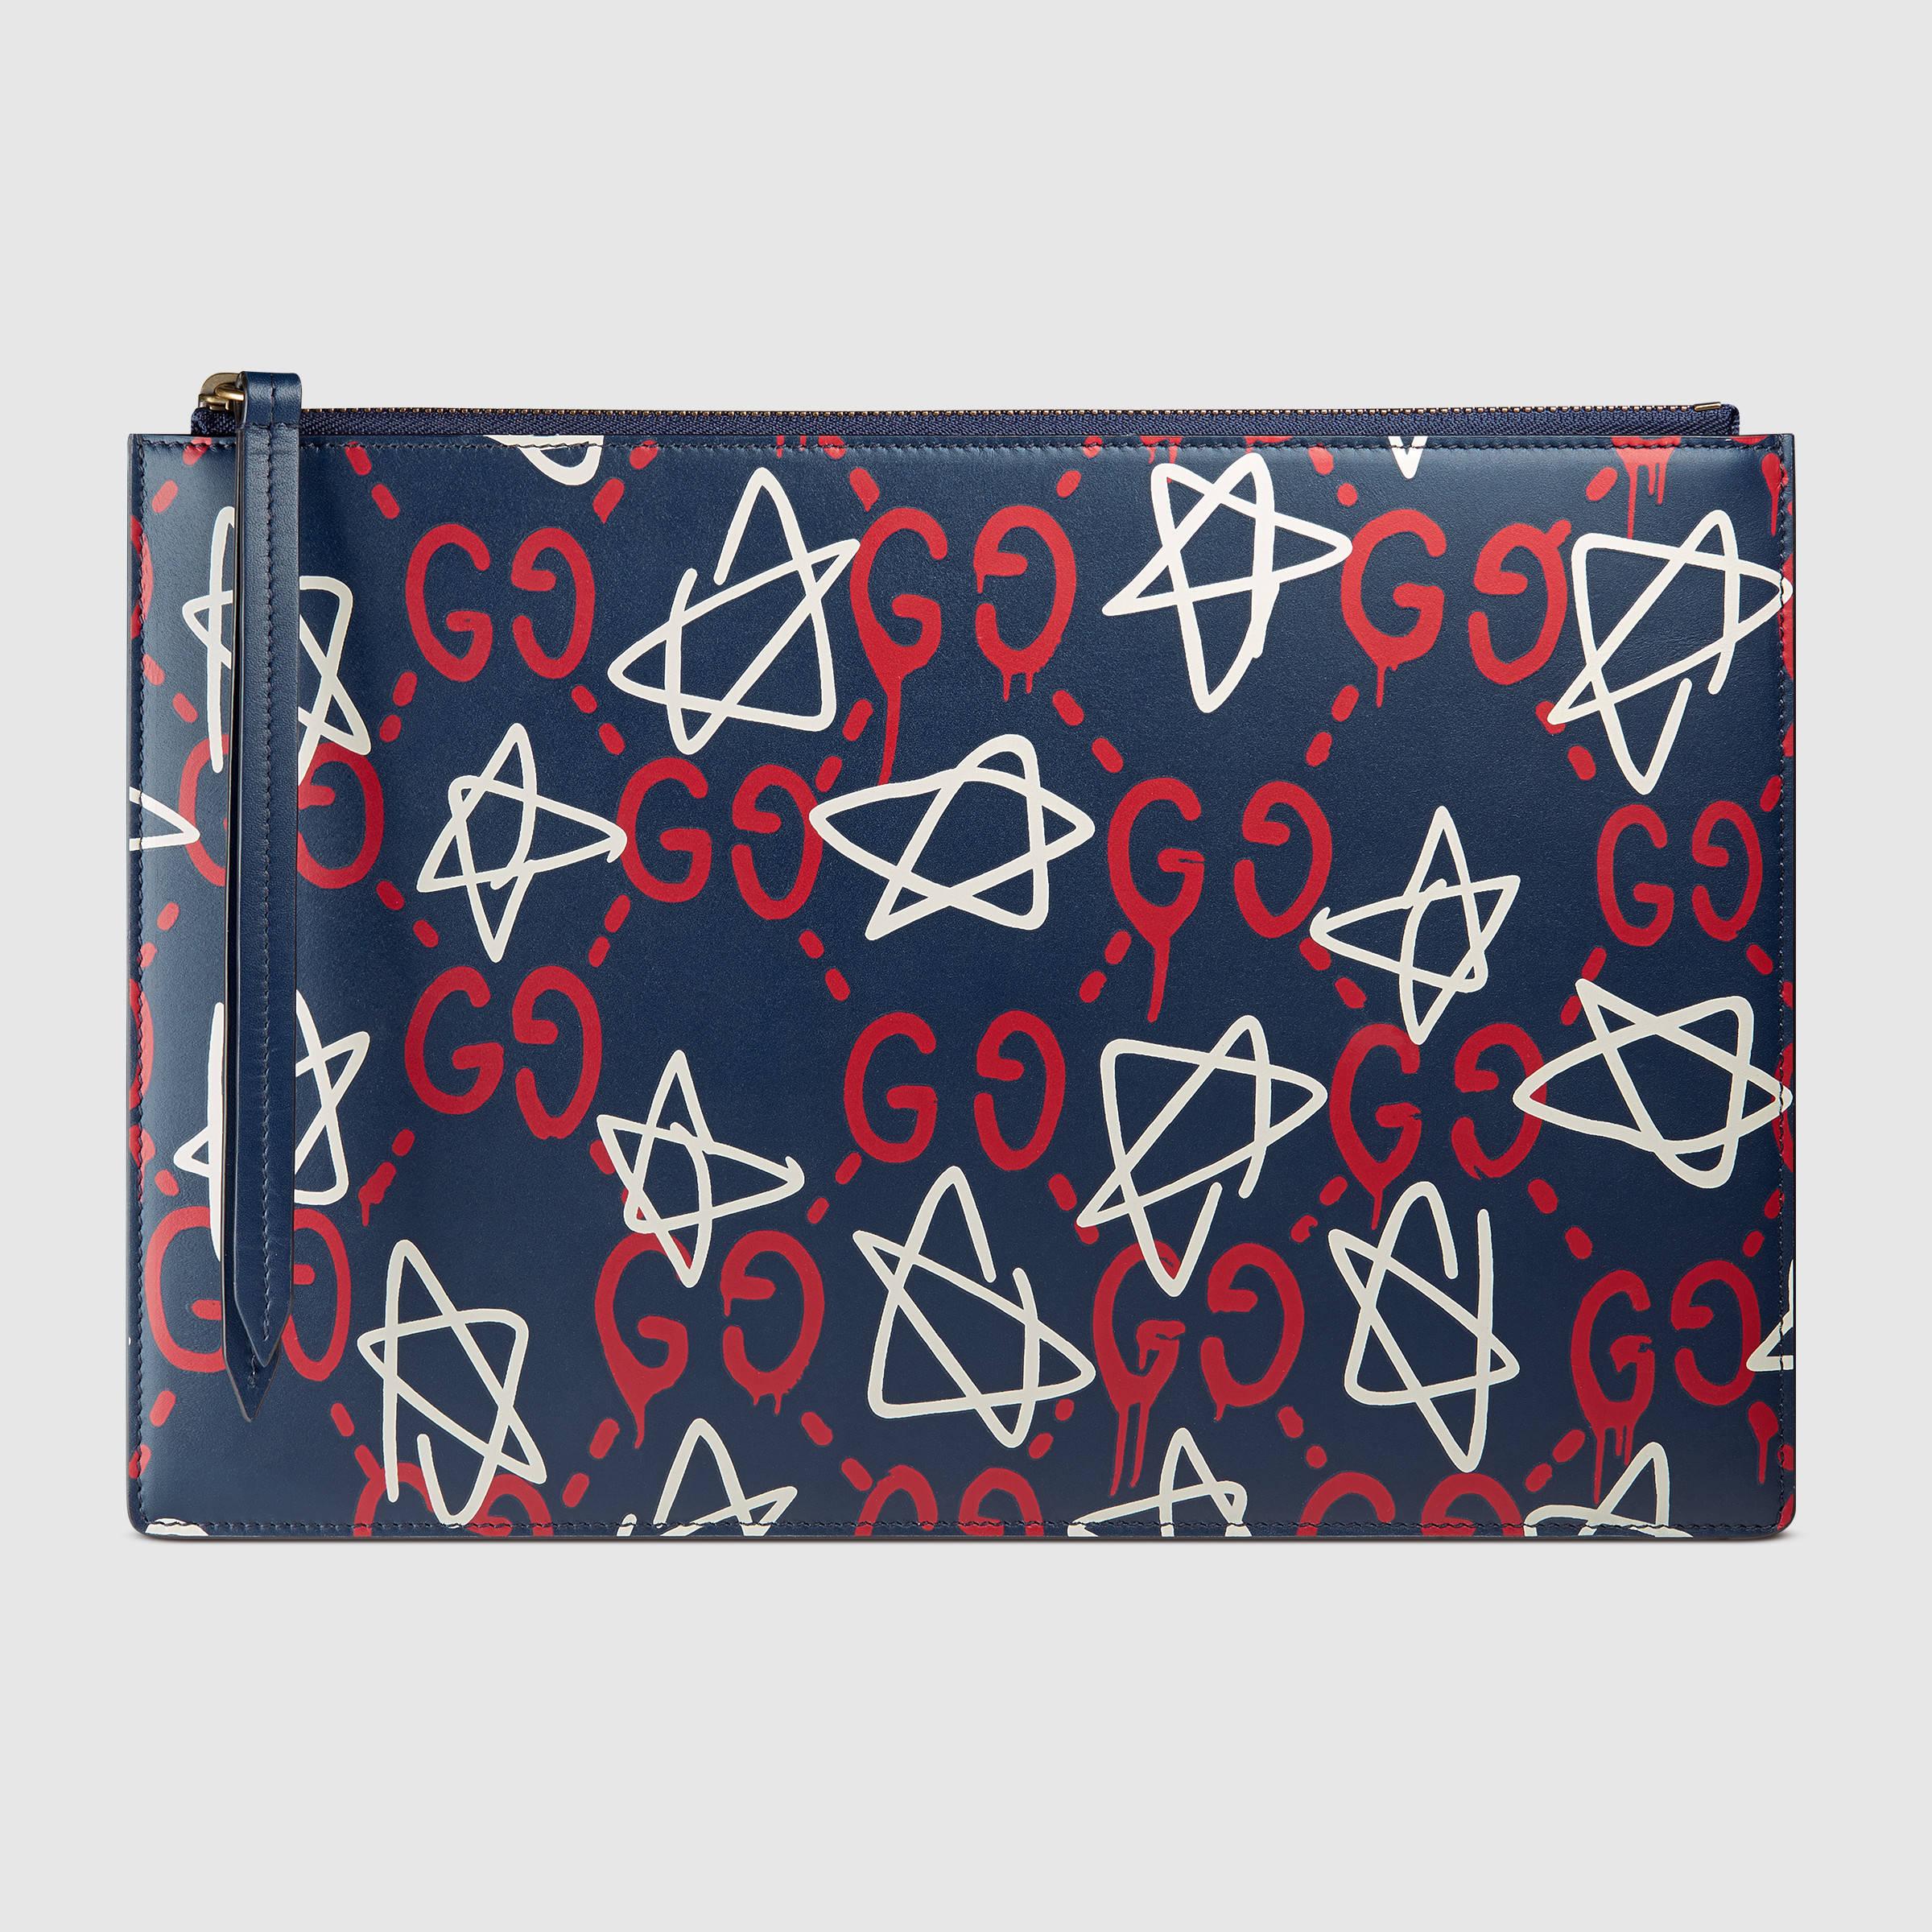 guccighost pouch